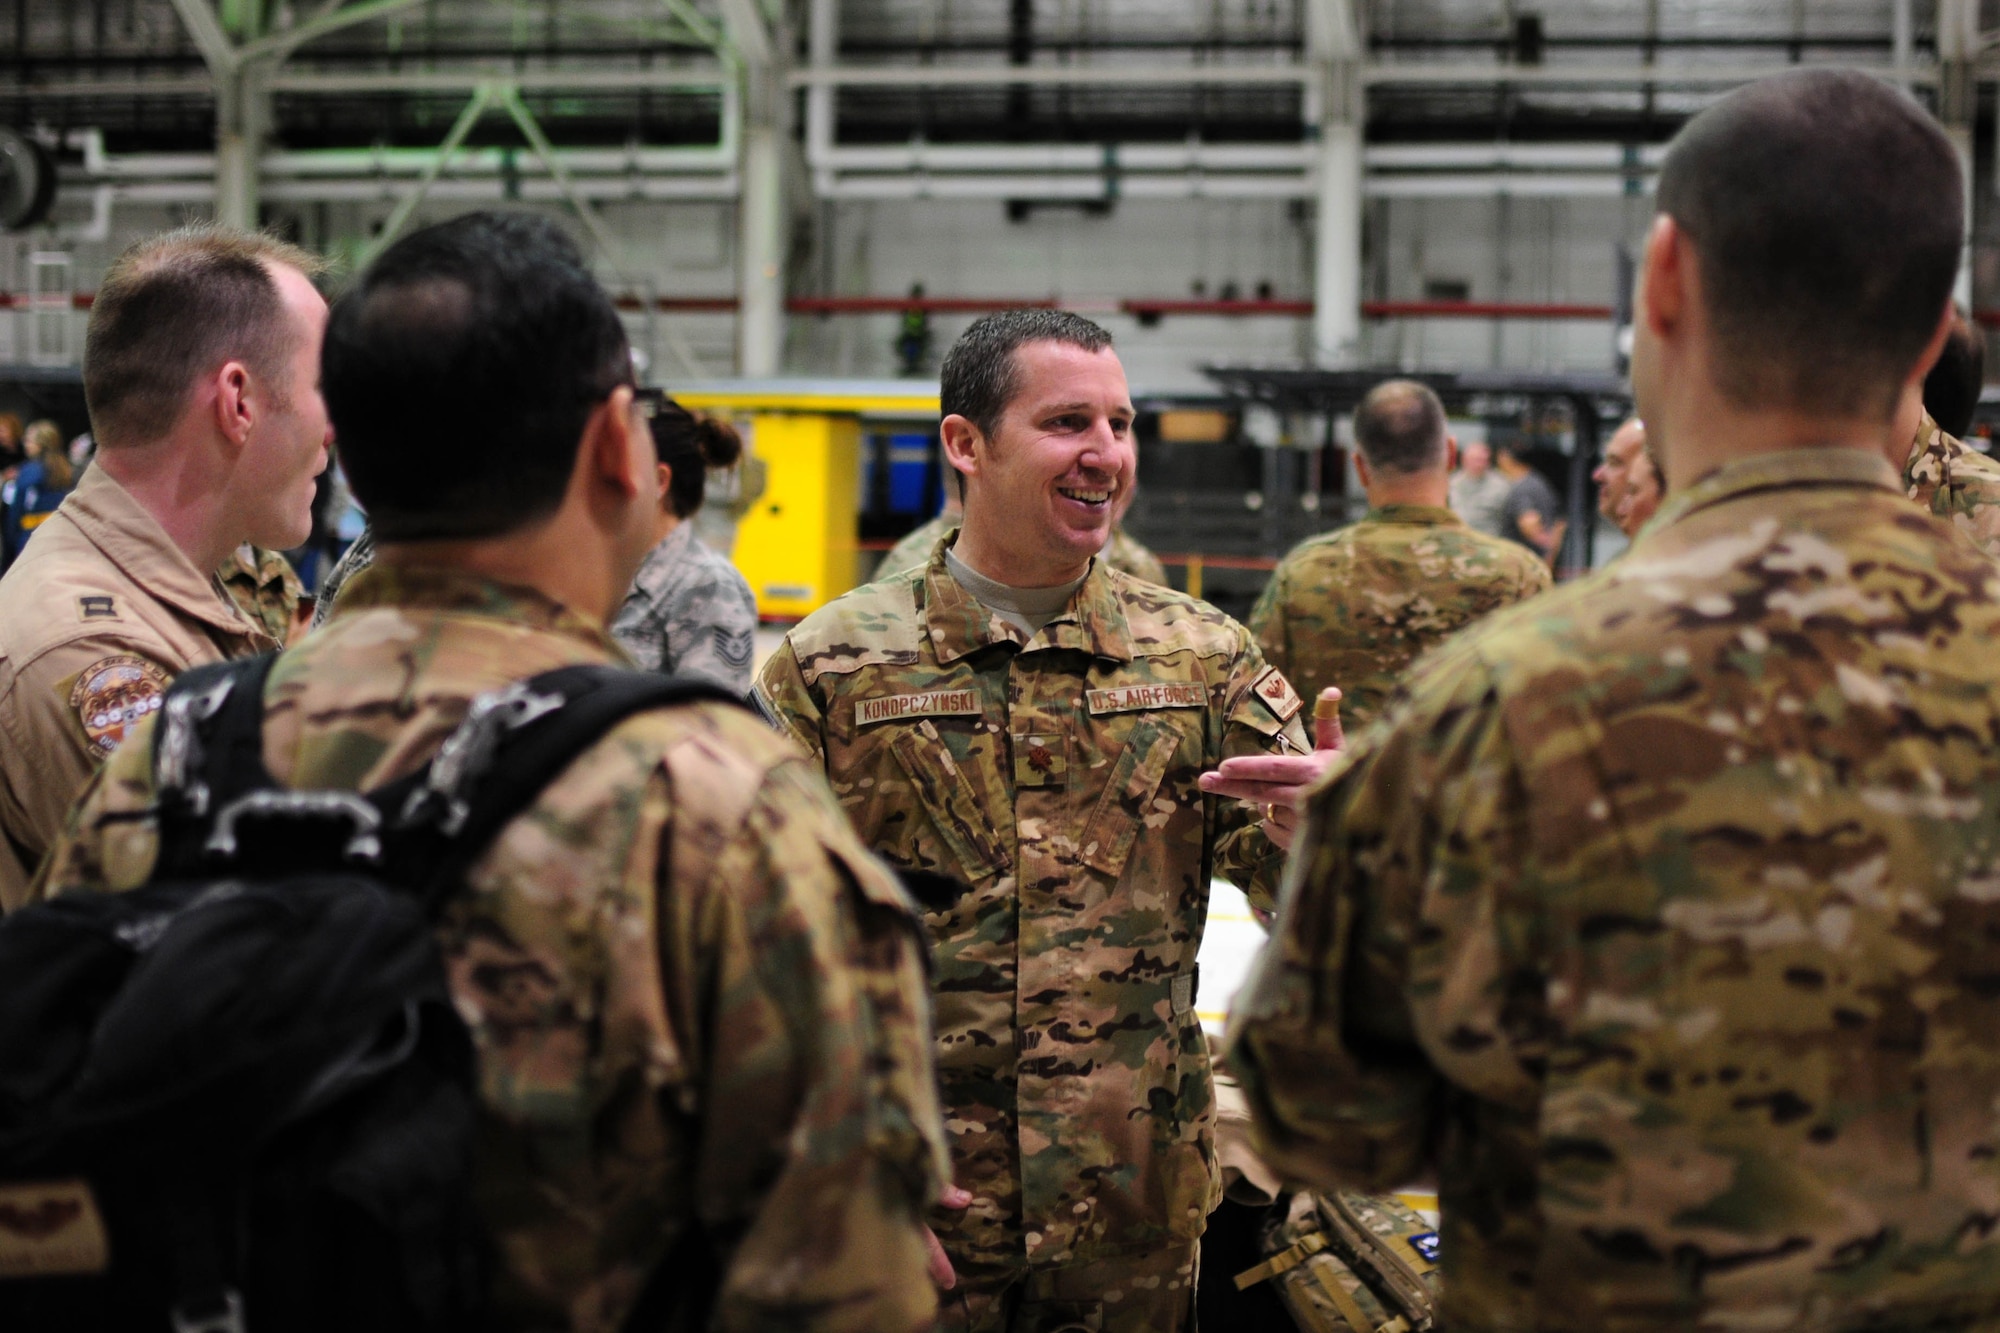 Members of the 914th Airlift Wing share a moment at Niagara Falls Air Reserve Station prior to deployment on May 7, 2016. The deployment will take these Airmen to Quatar in support of Operation Inherent Resolve. (U.S. Air Force photo by Staff Sgt. Richard D. Mekkri/released)